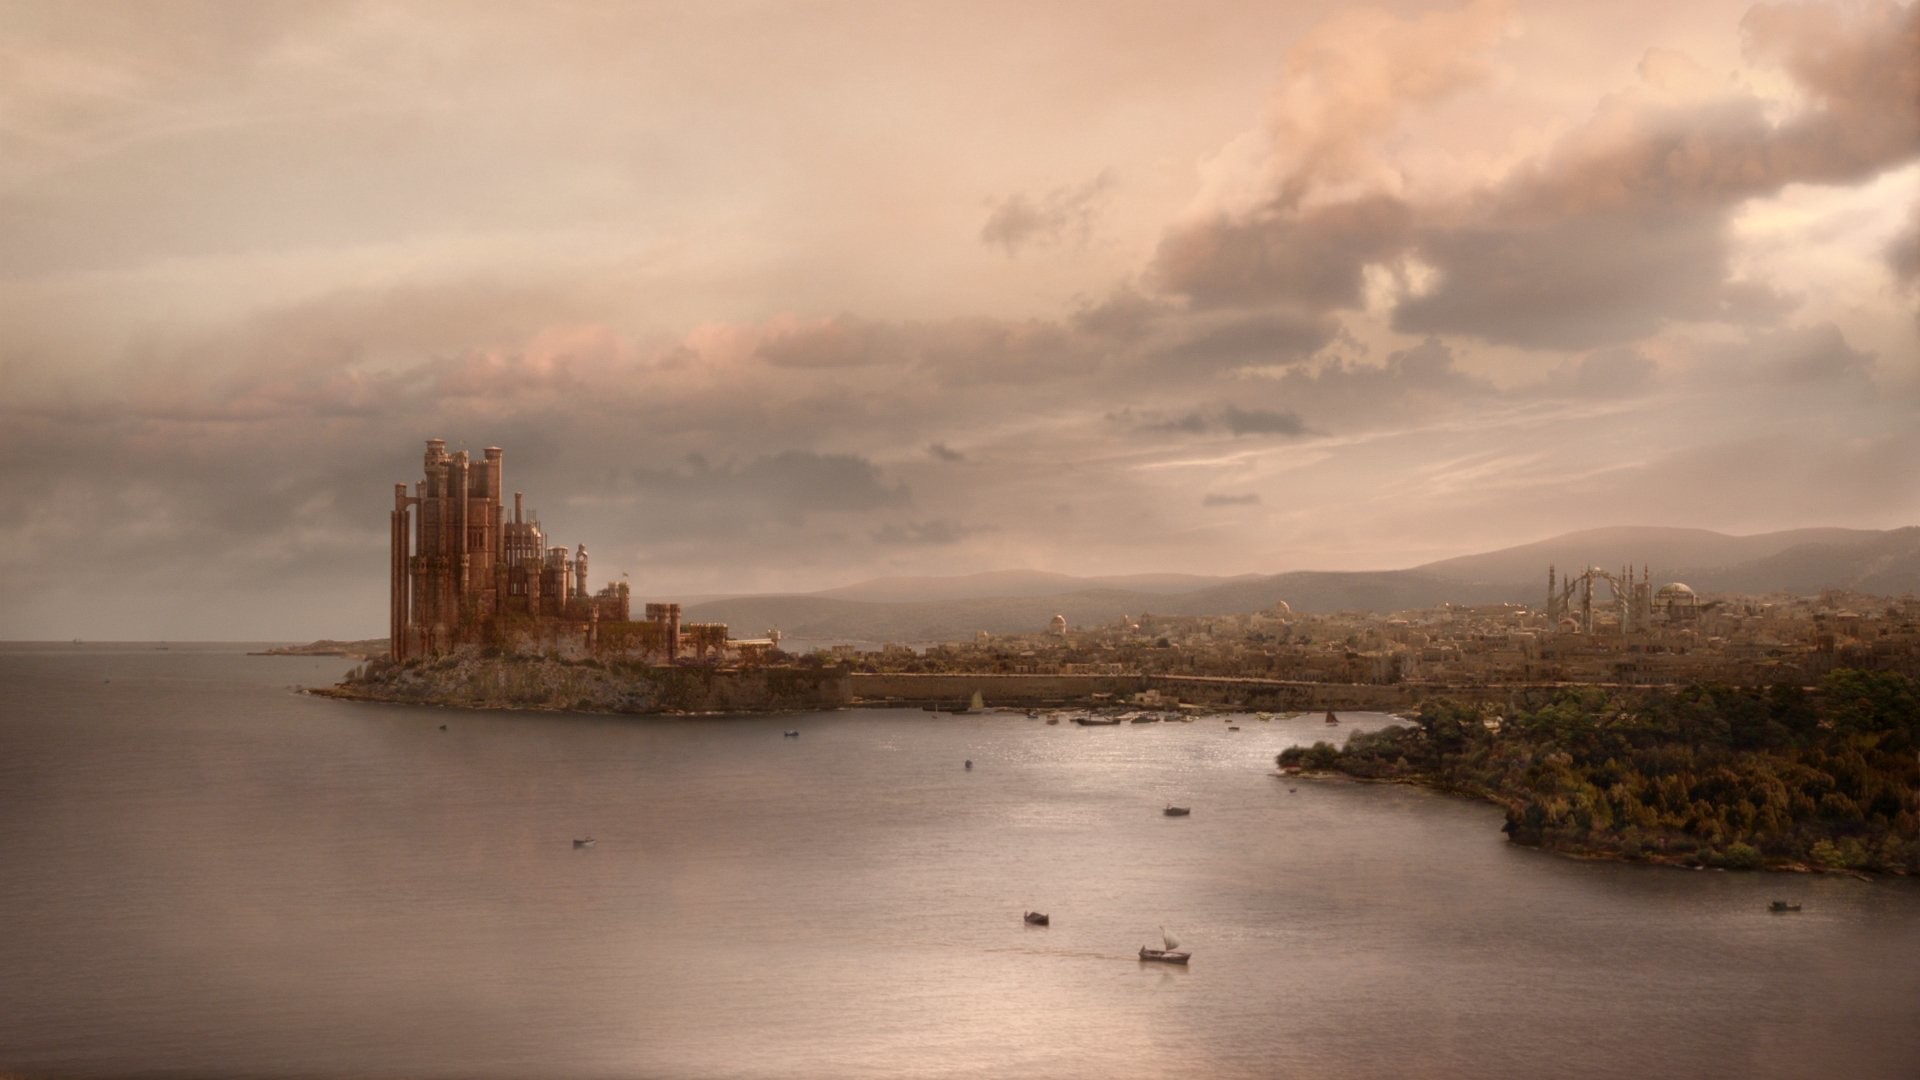 HD Wallpaper Background ID220983. TV Show Game of Thrones. 65 Like. Favorite